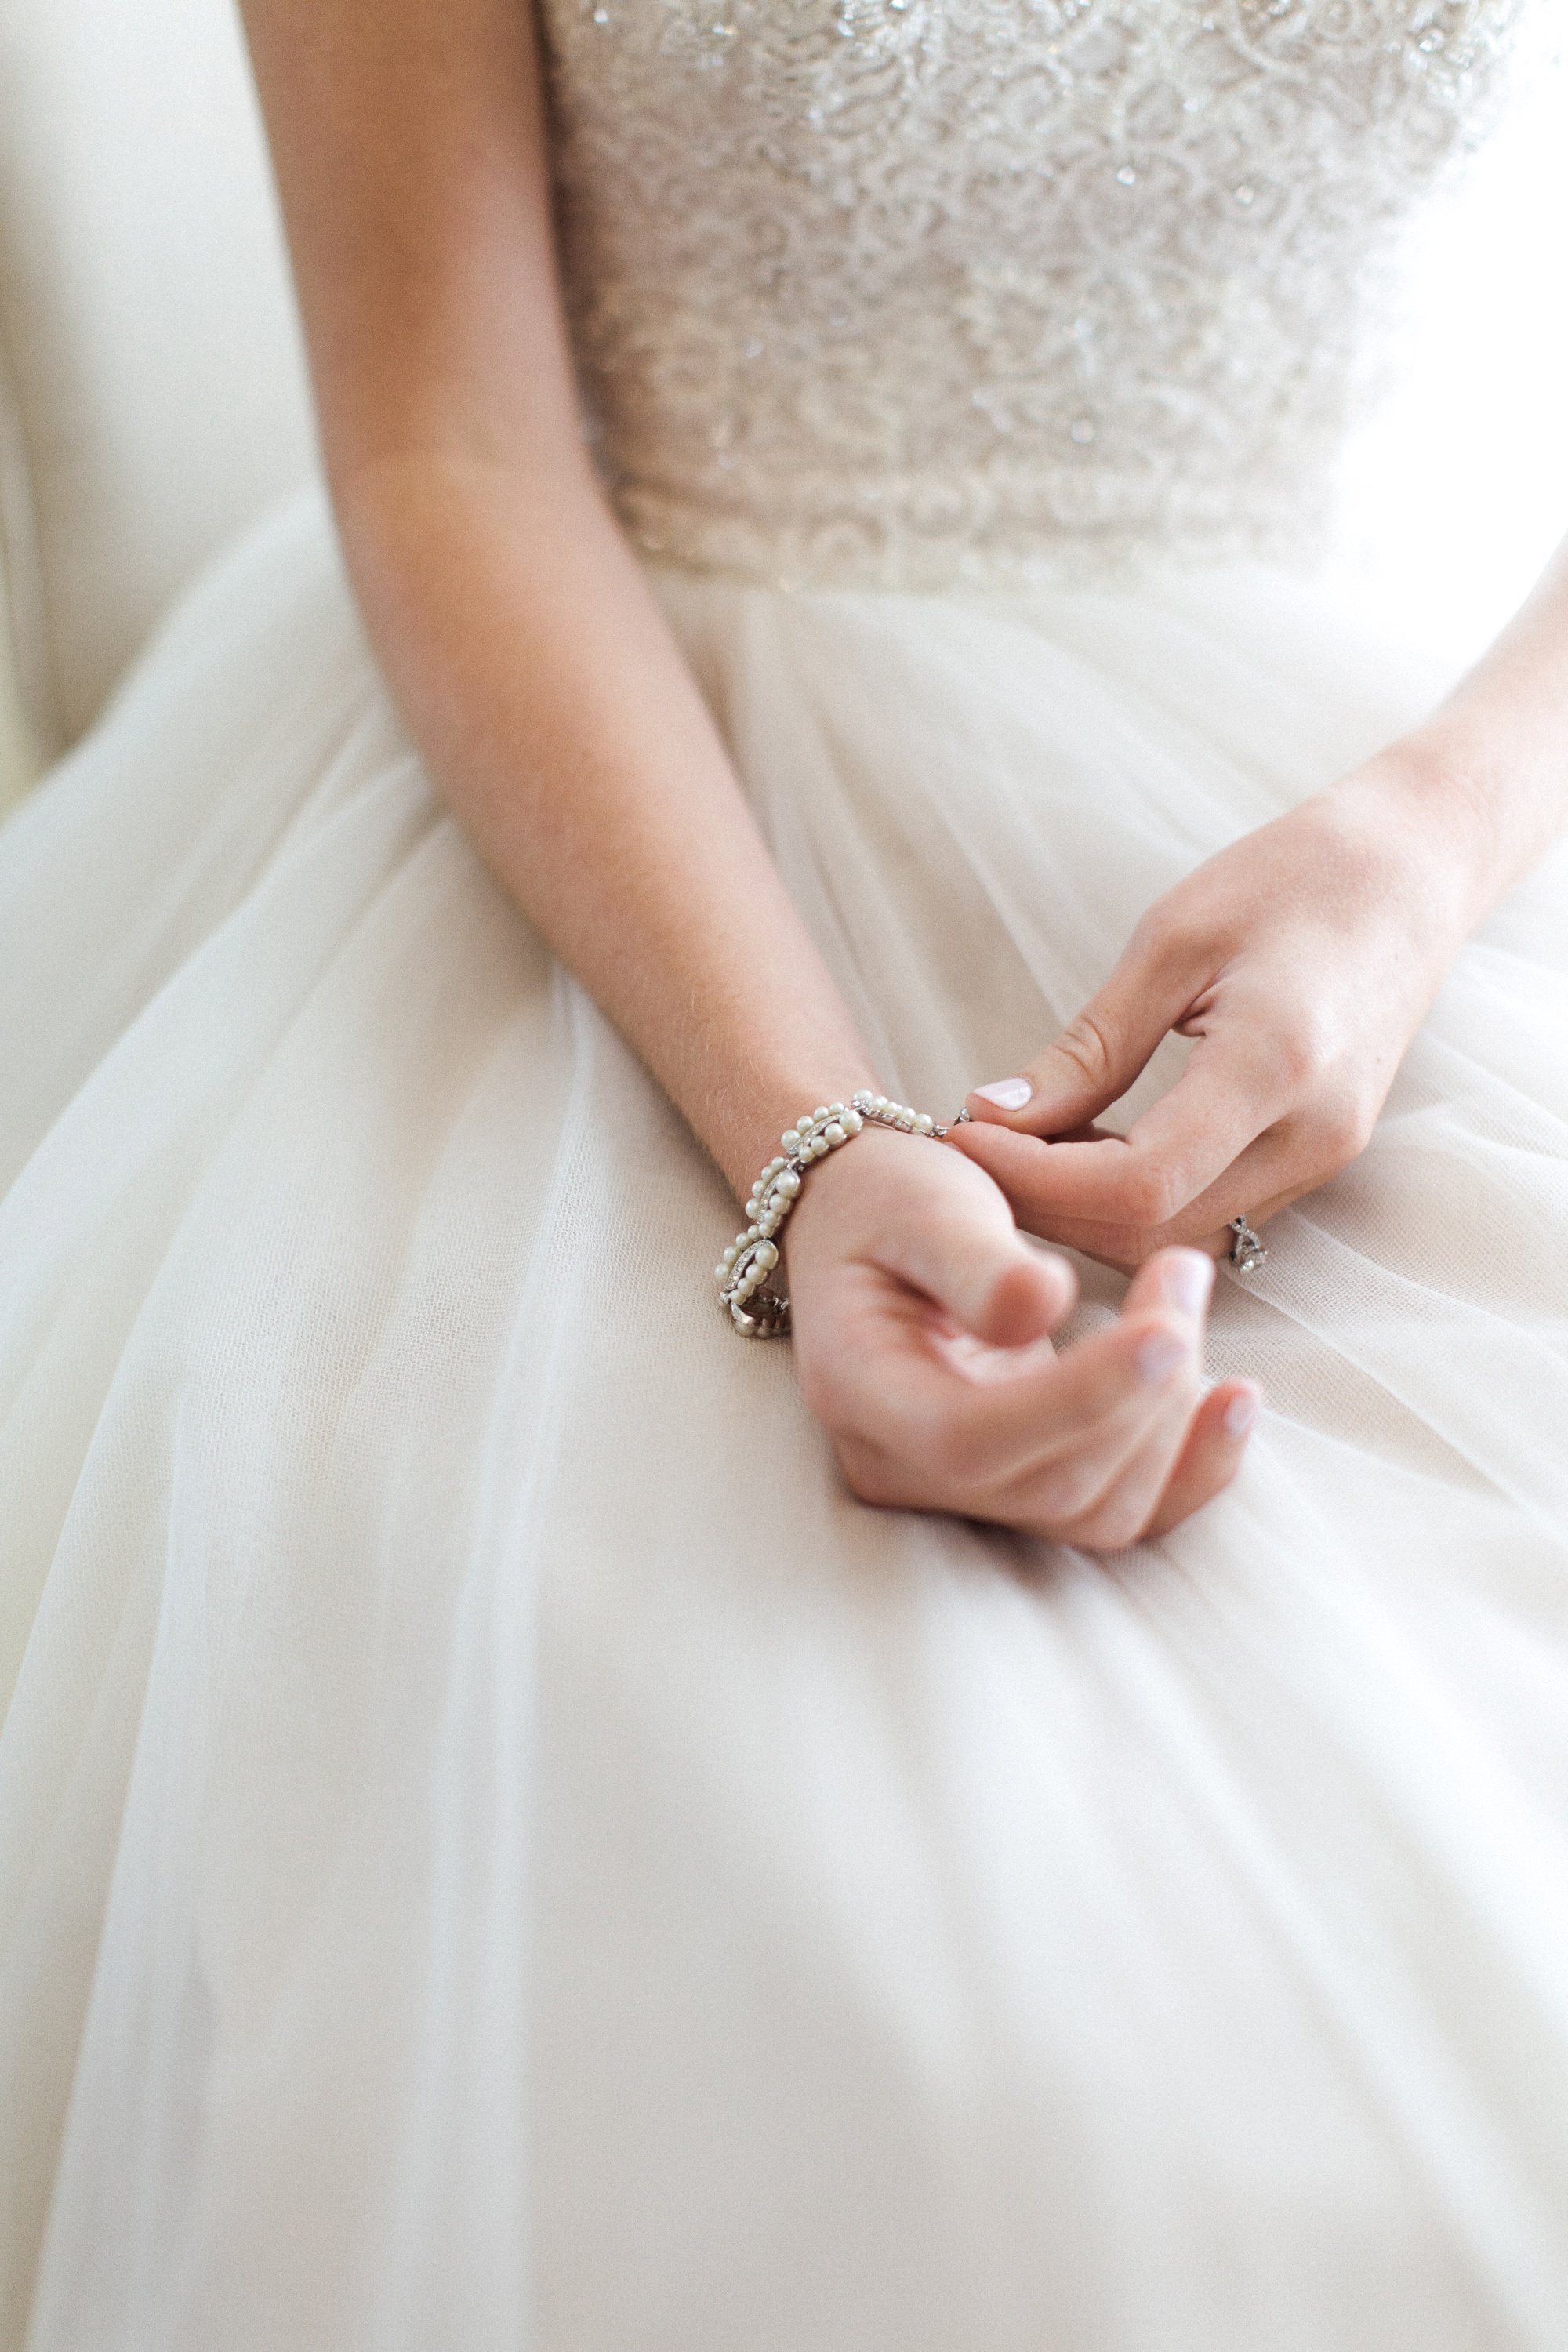 This bridal bracelet is the perfect combination of elegance and simplicity.